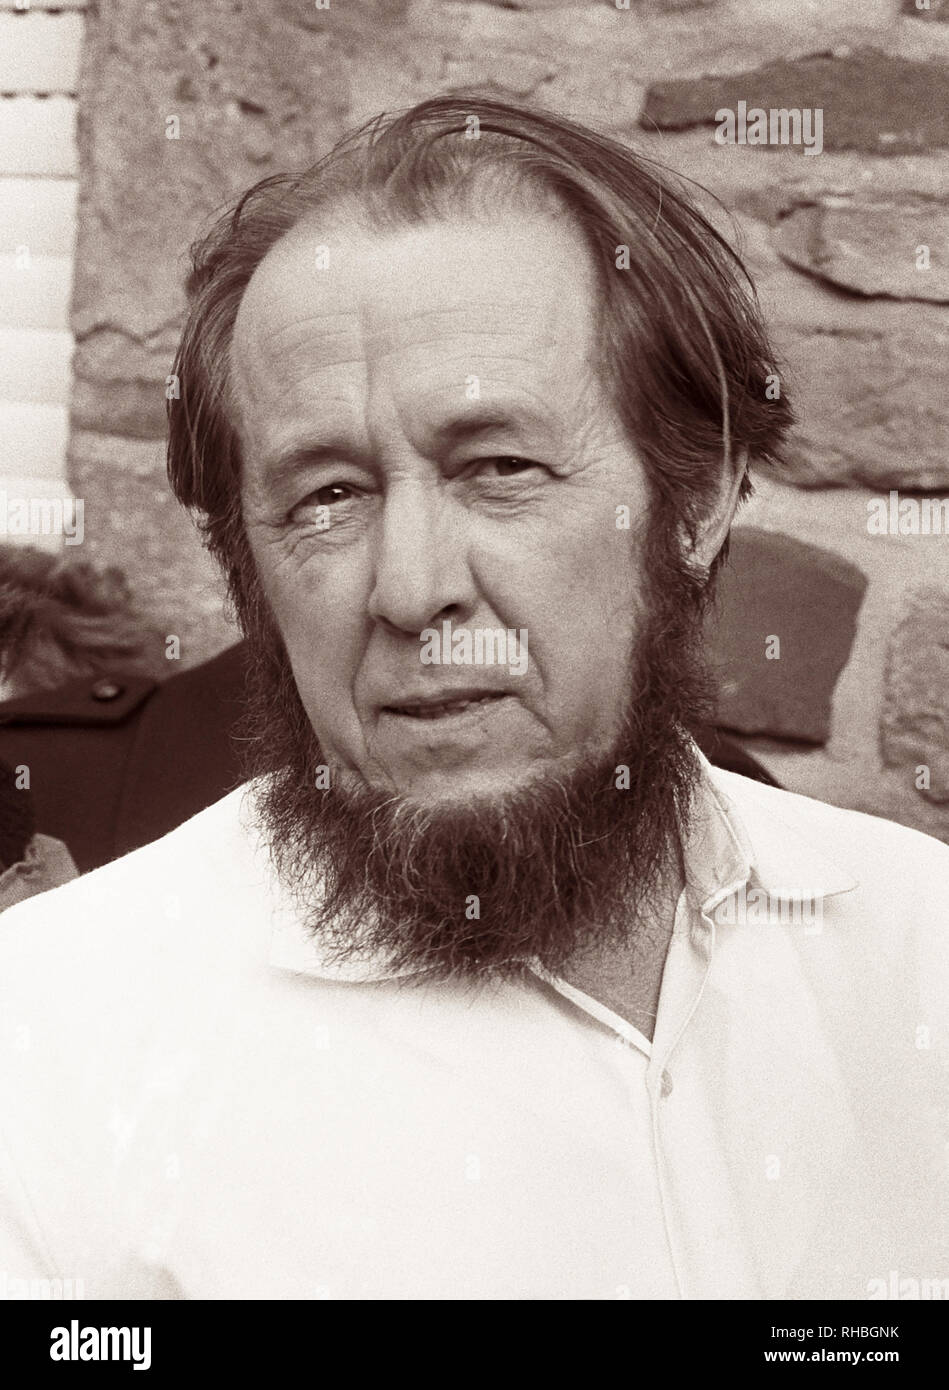 Russian writer Aleksandr Solzhenitsyn in 1974, after being exiled from the Soviet Union, in Langenbroich, West Germany where he was staying in the home of writer Heinrich Böll. Stock Photo